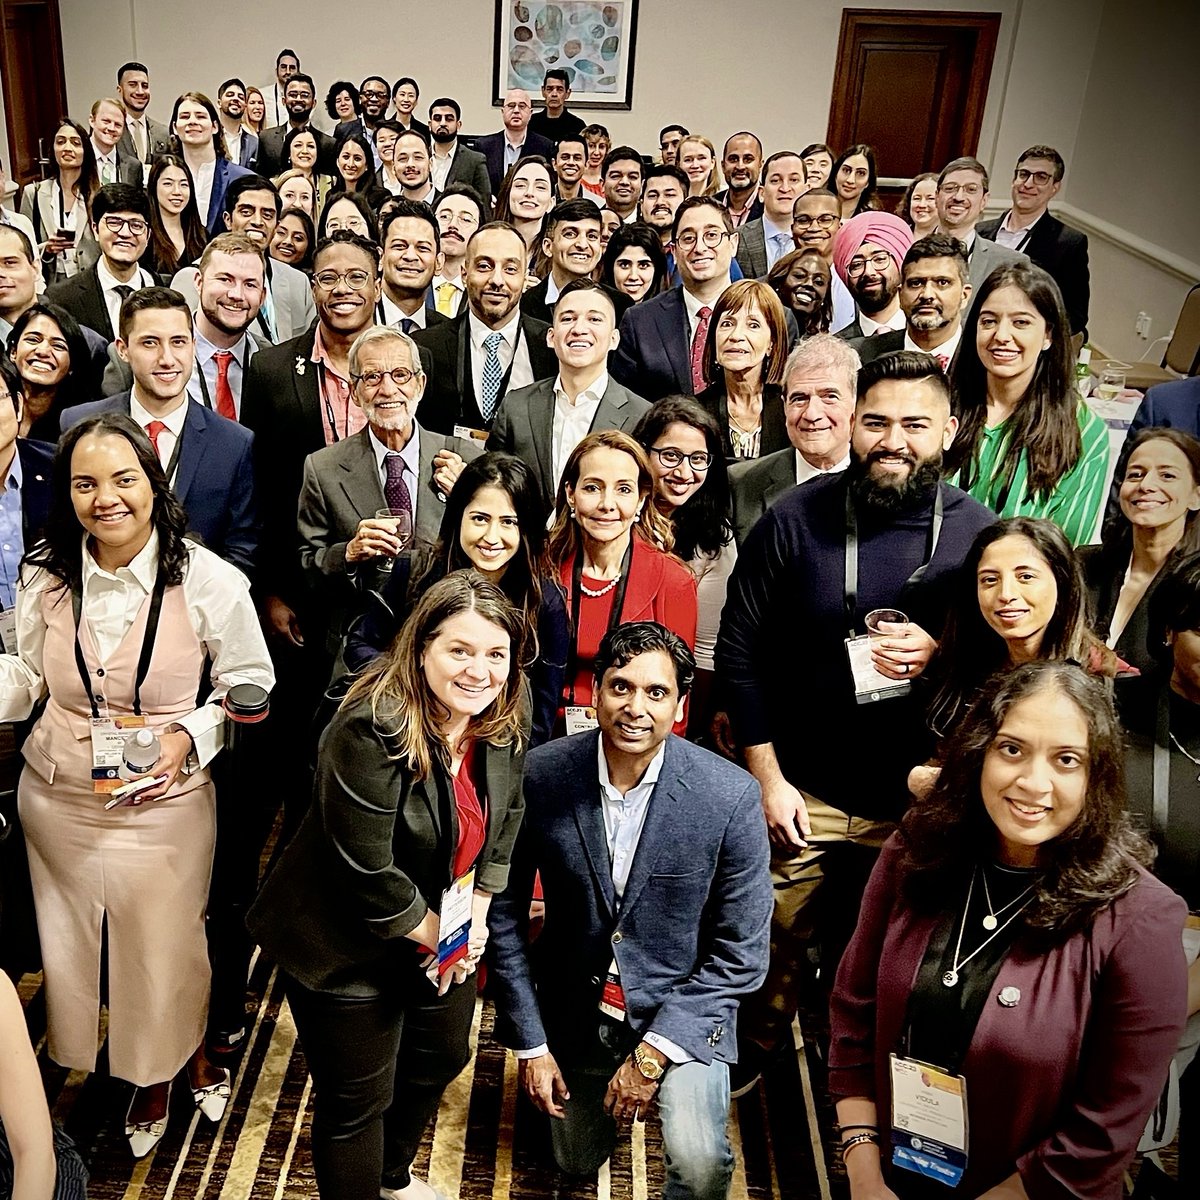 #TBT throwback to our @NYSCACC ACC.23 reception in New Orleans! We hope to see you again in Atlanta for our #ACC24 reception on April 7th! Details here: mailchi.mp/ny-acc/2024cha… @ACCinTouch #ACCchapters @GiorgioMedranda